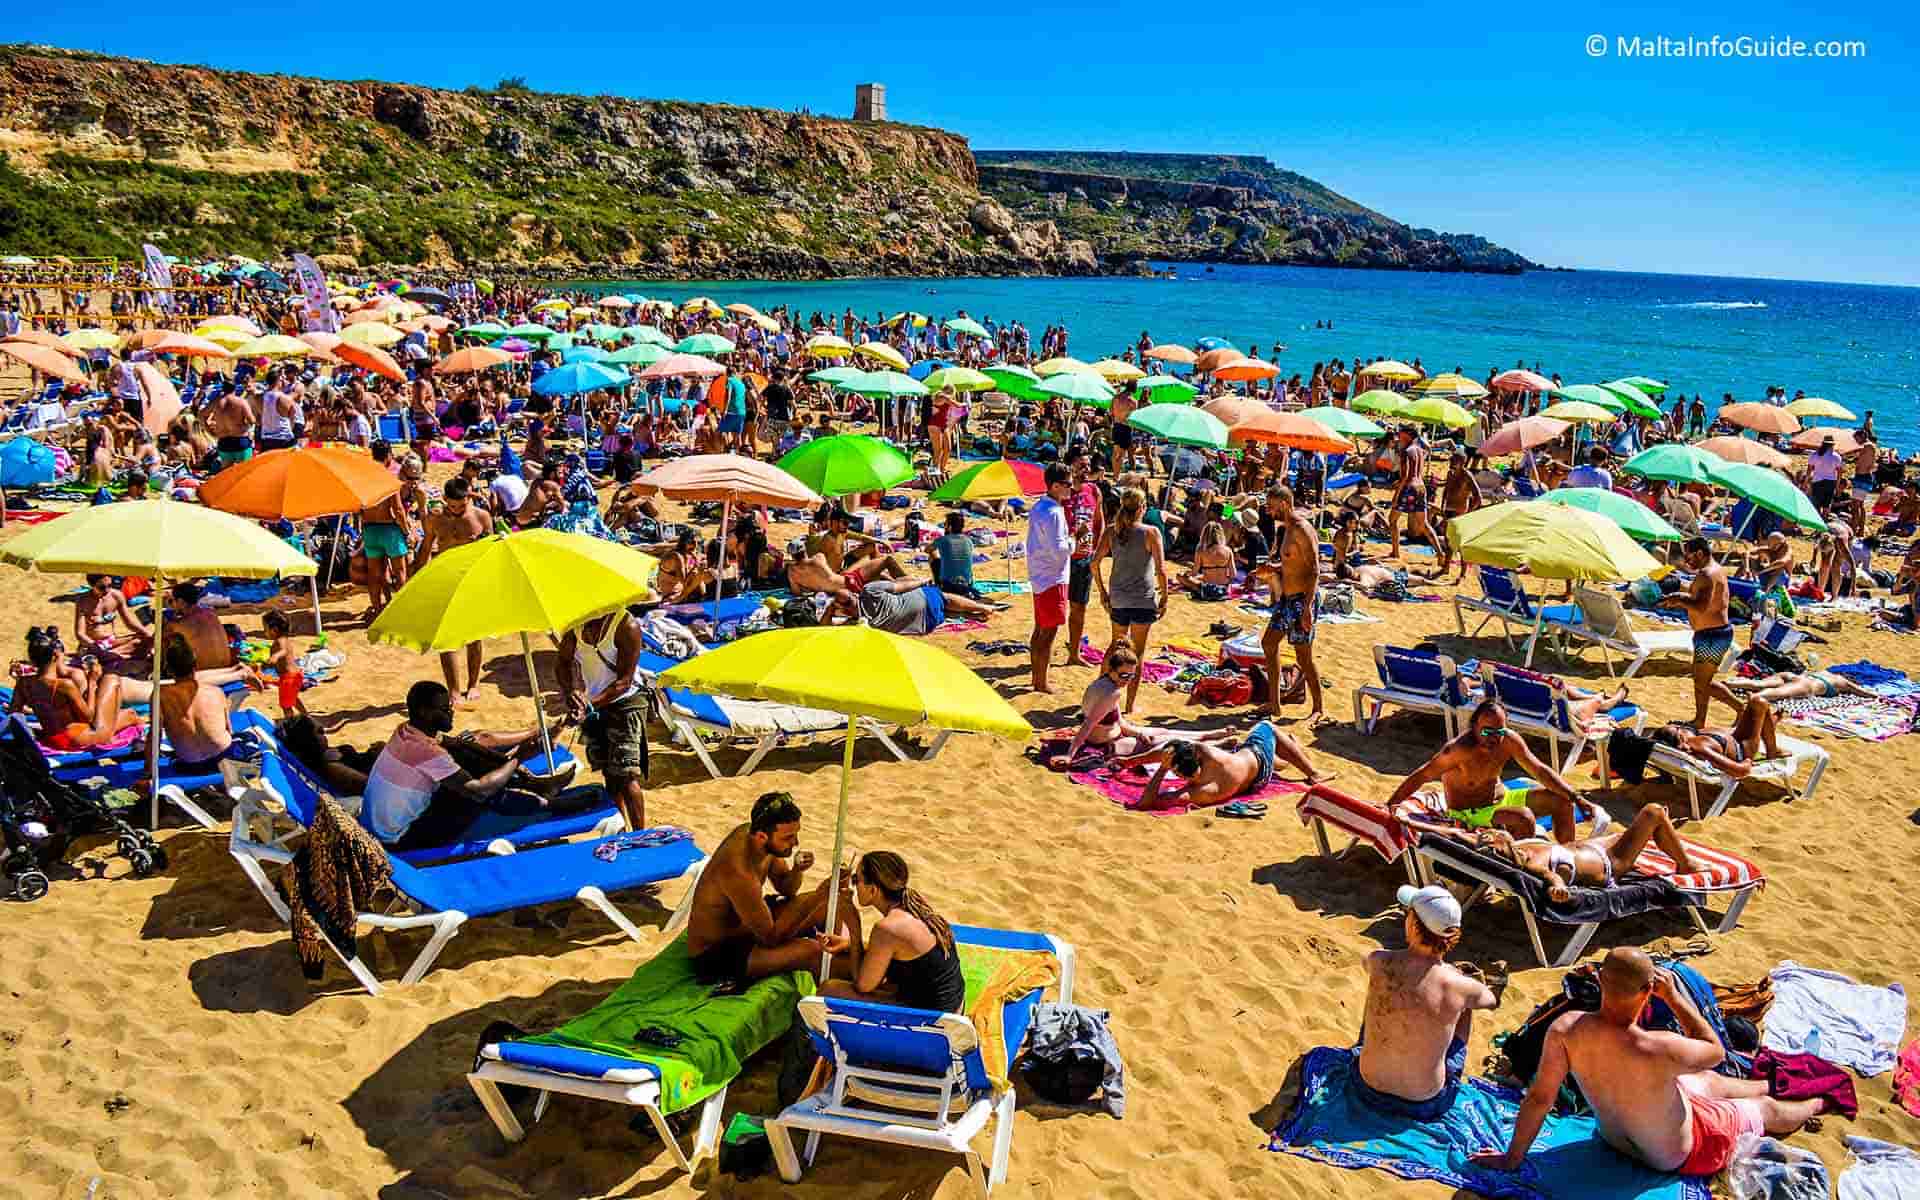 People on sunbeds at on of the best beaches, Golden Bay Malta